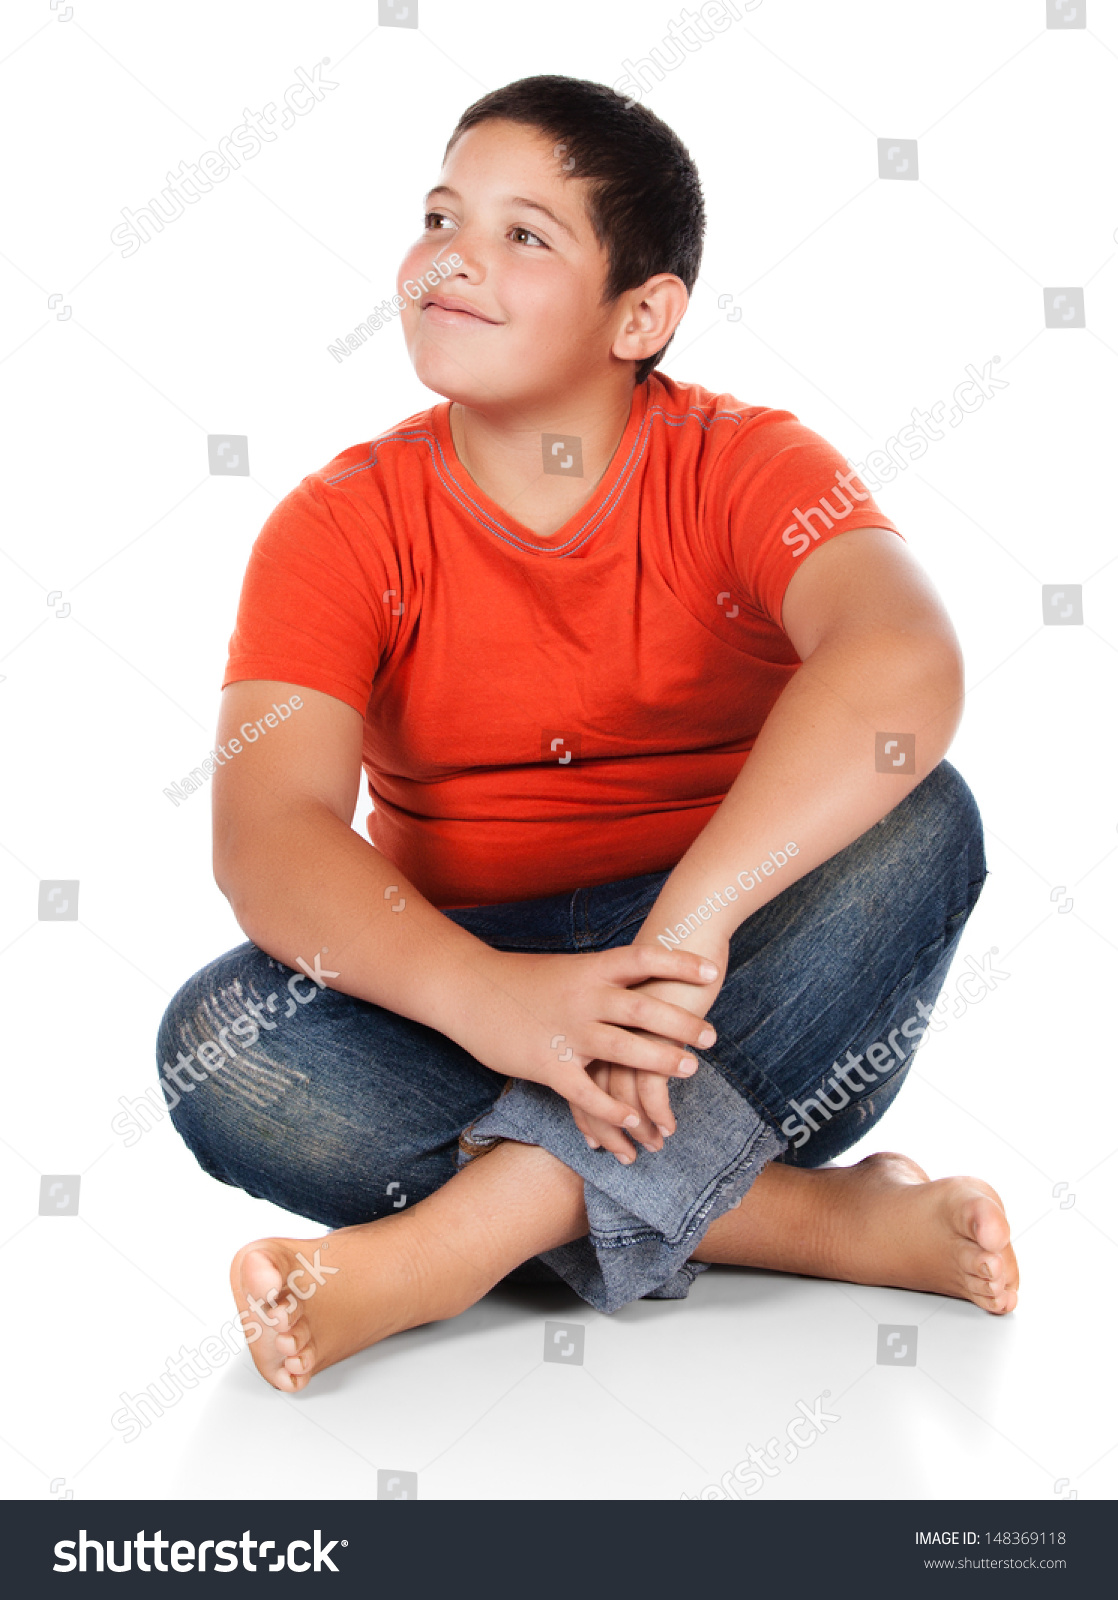 Young Caucasian Boy Wearing An Orange T-Shirt And Blue Jeans. The Boy ...